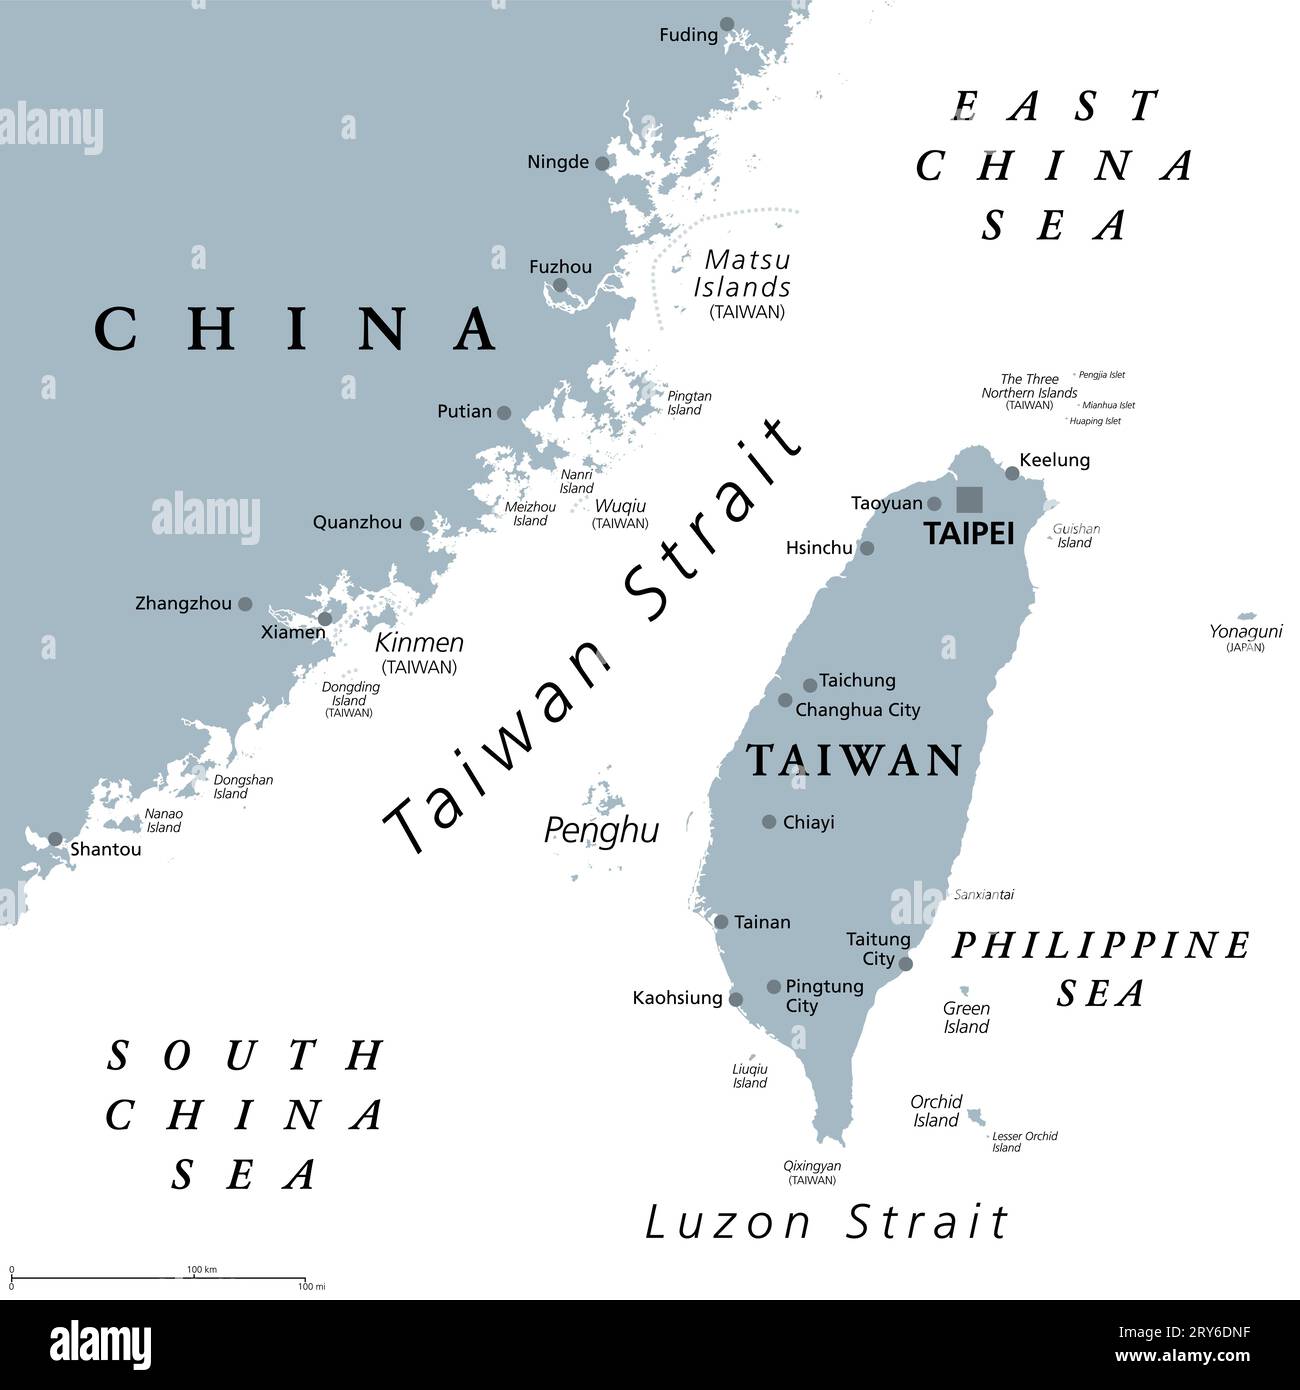 Taiwan Strait, gray political map. Important waterway and disputed international waters, separating the island of Taiwan and continental Asia. Stock Photo